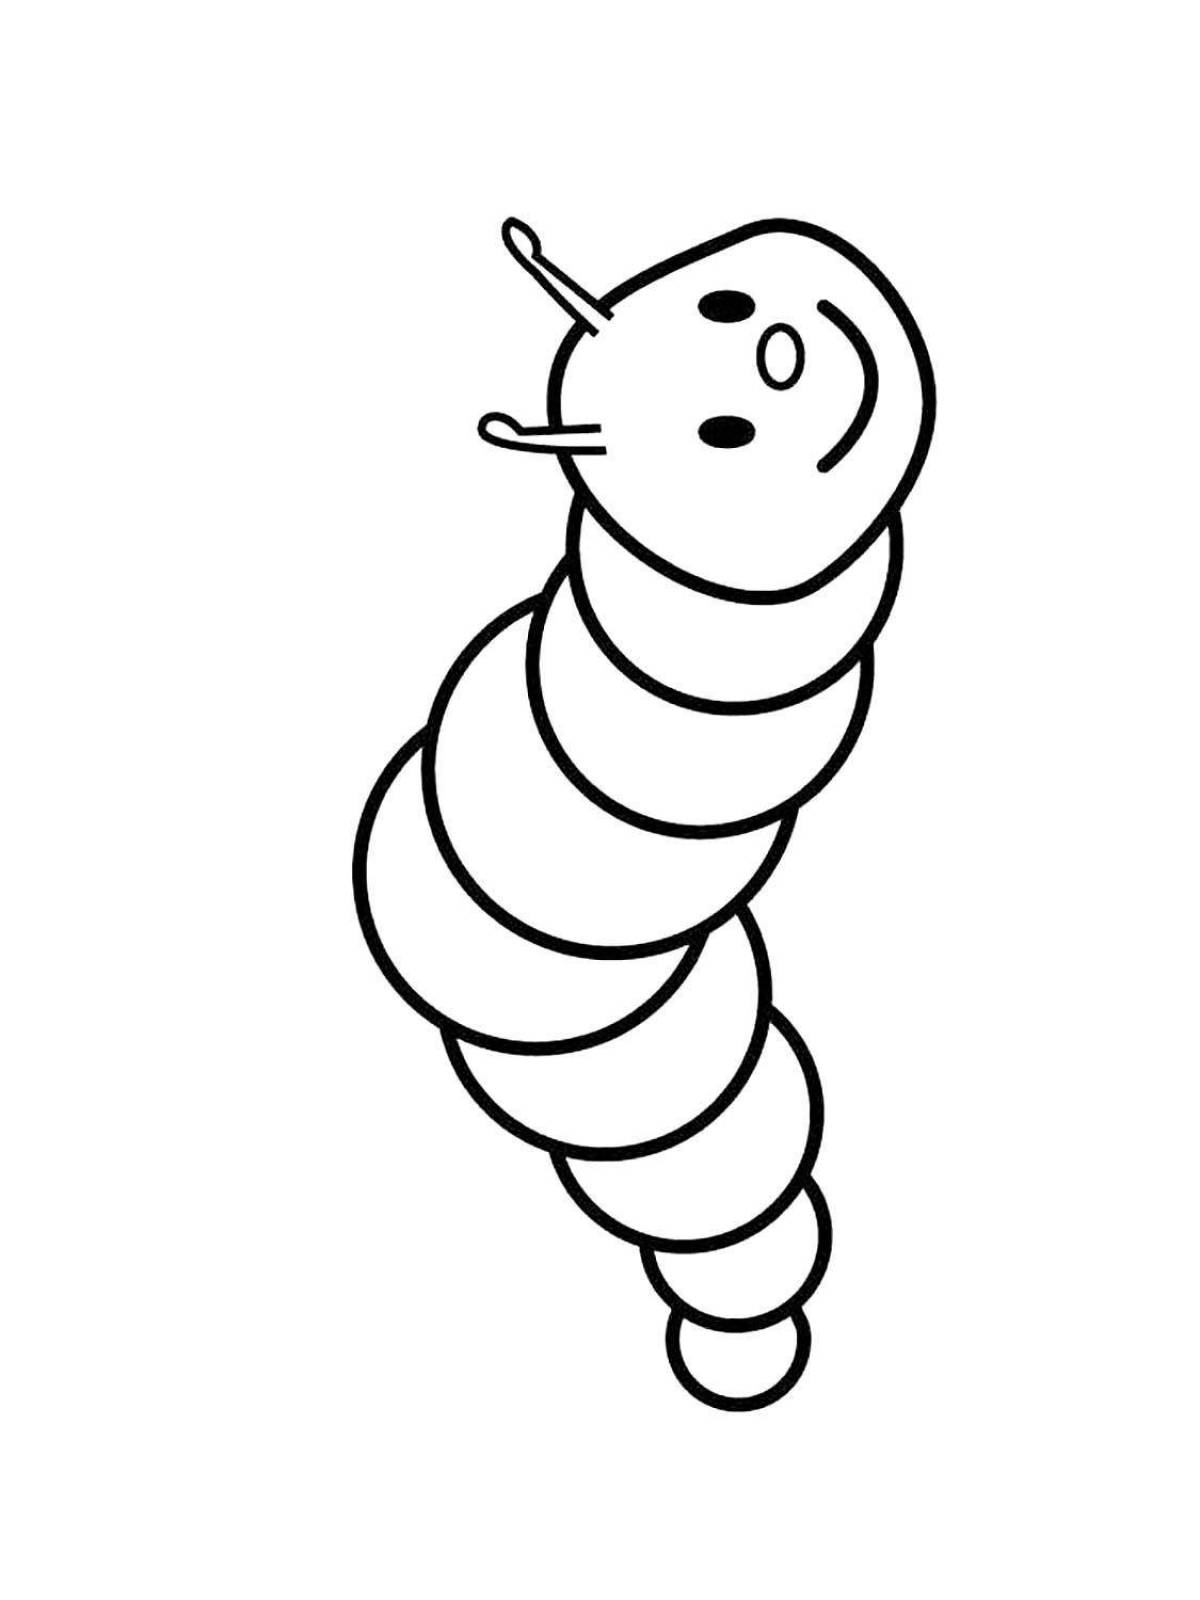 Animated caterpillar coloring page